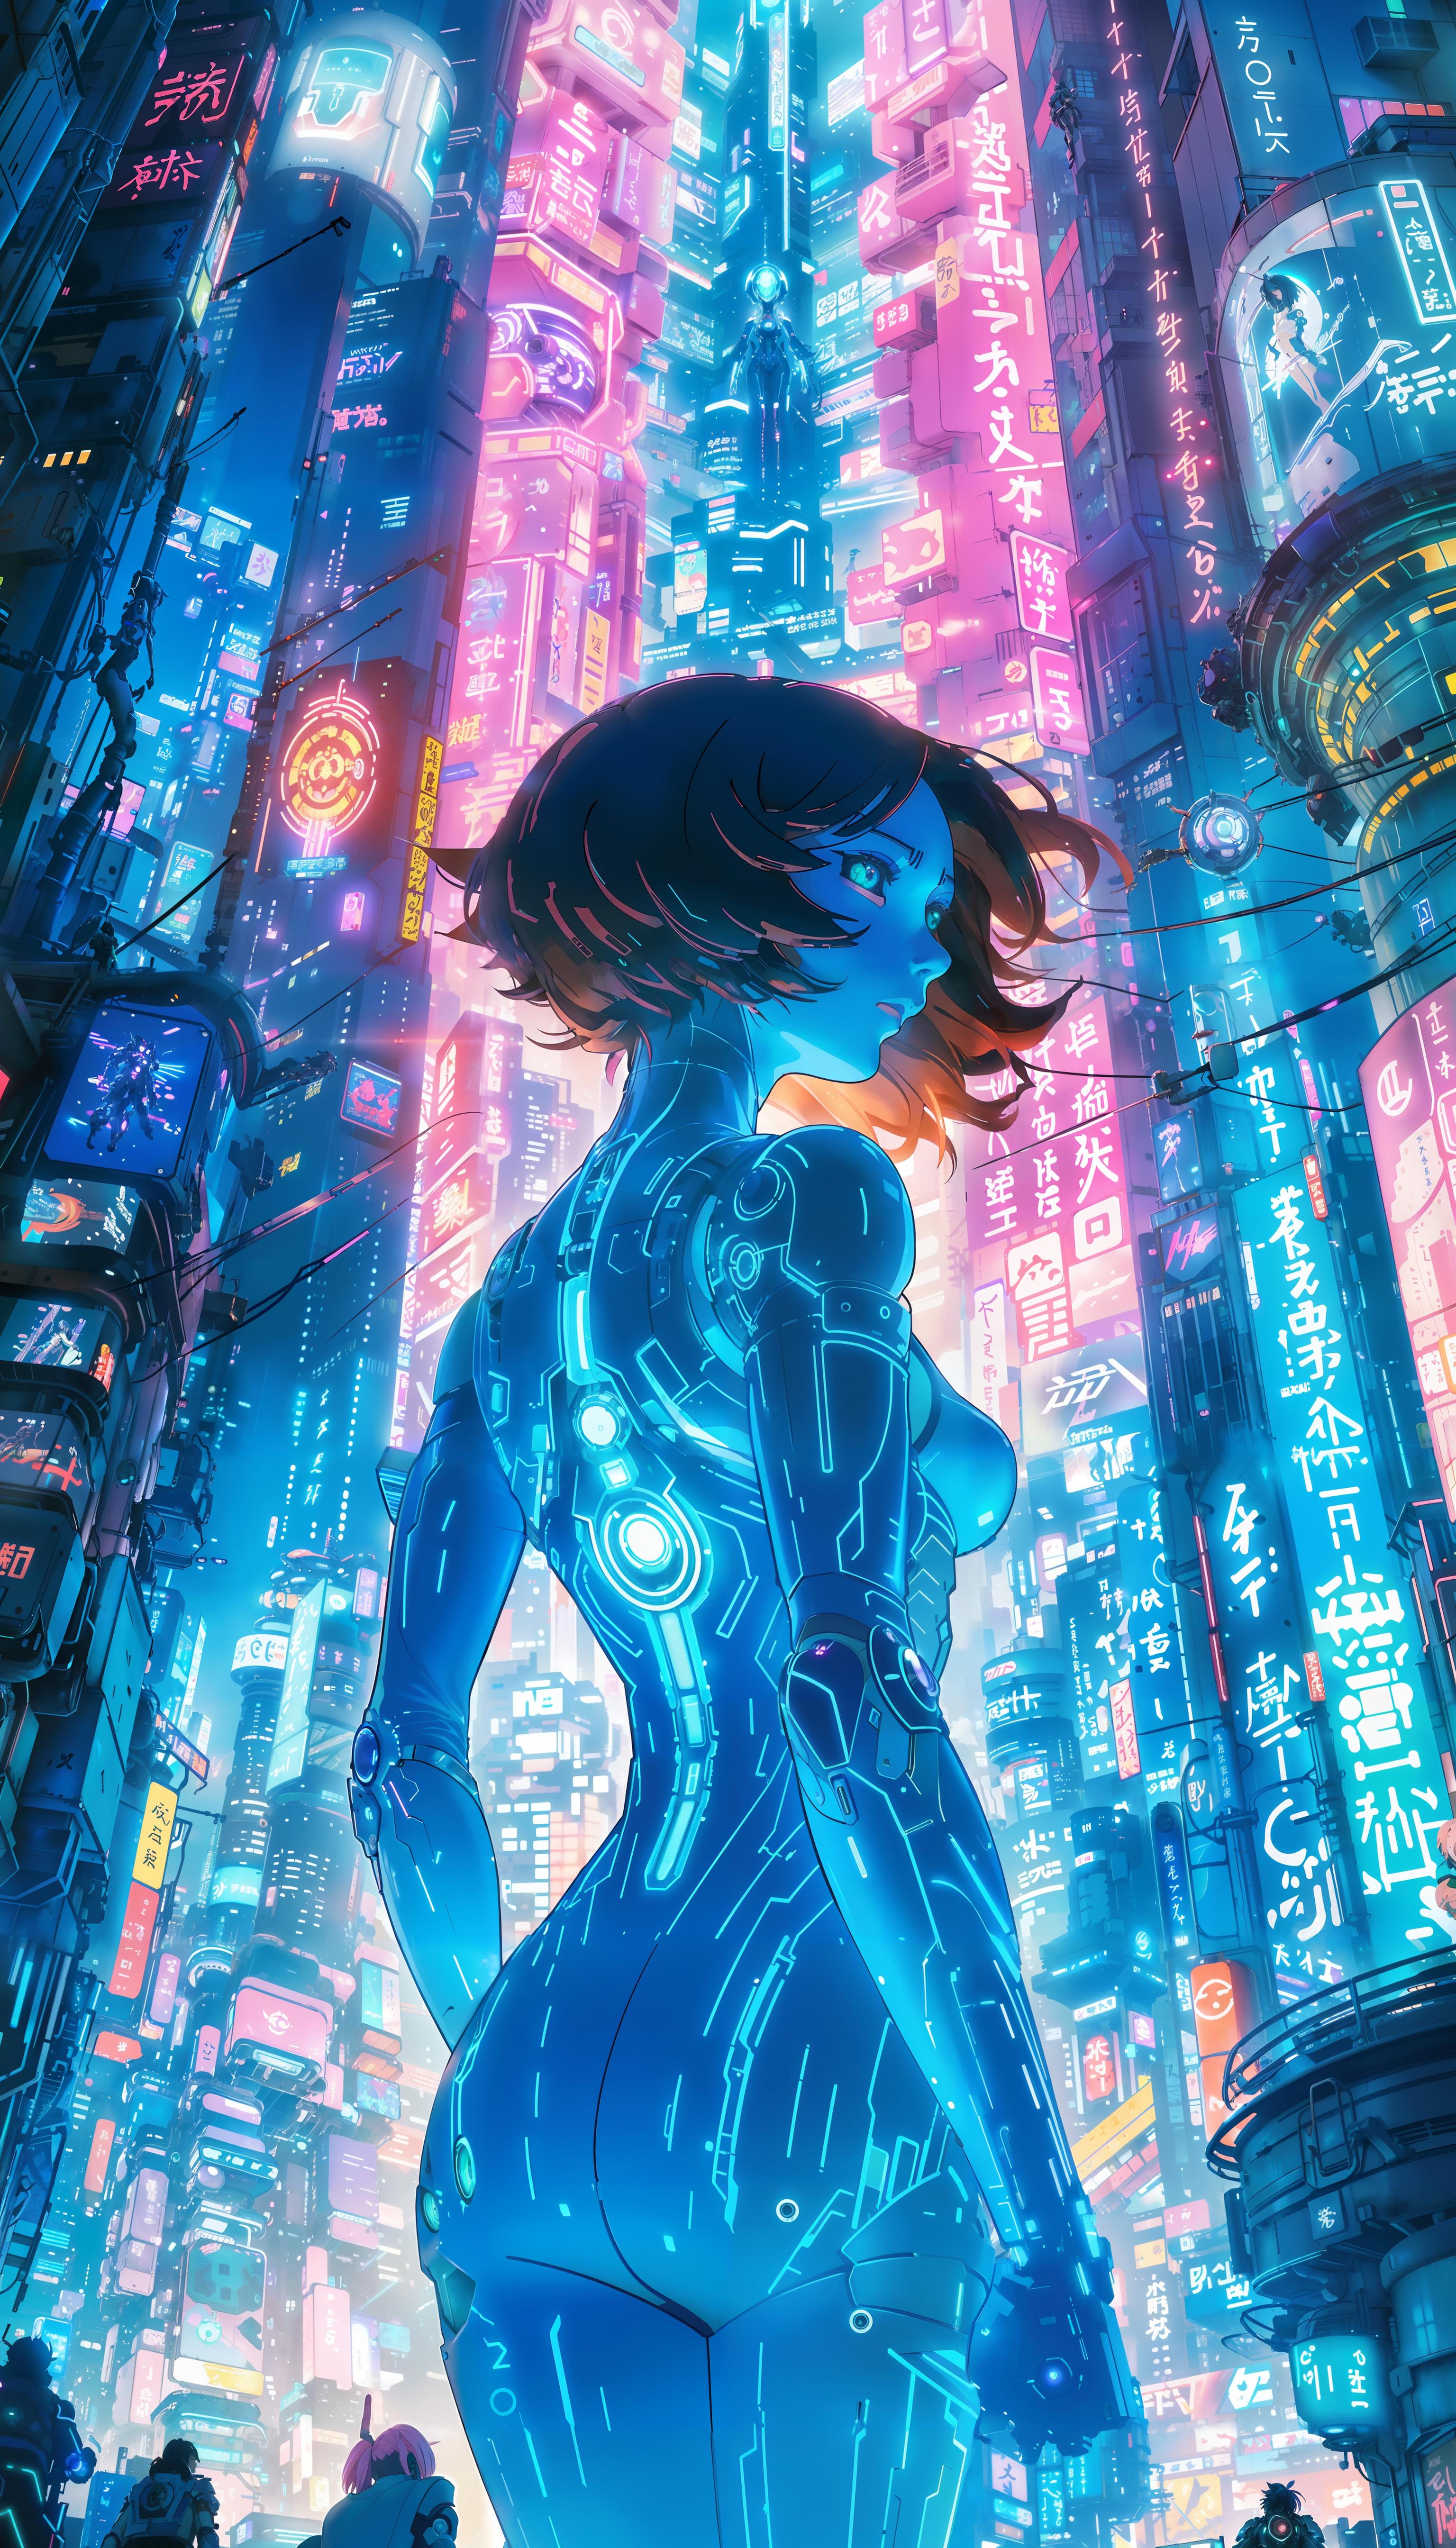 Woman in a blue dress standing in a futuristic city surrounded by neon lights.